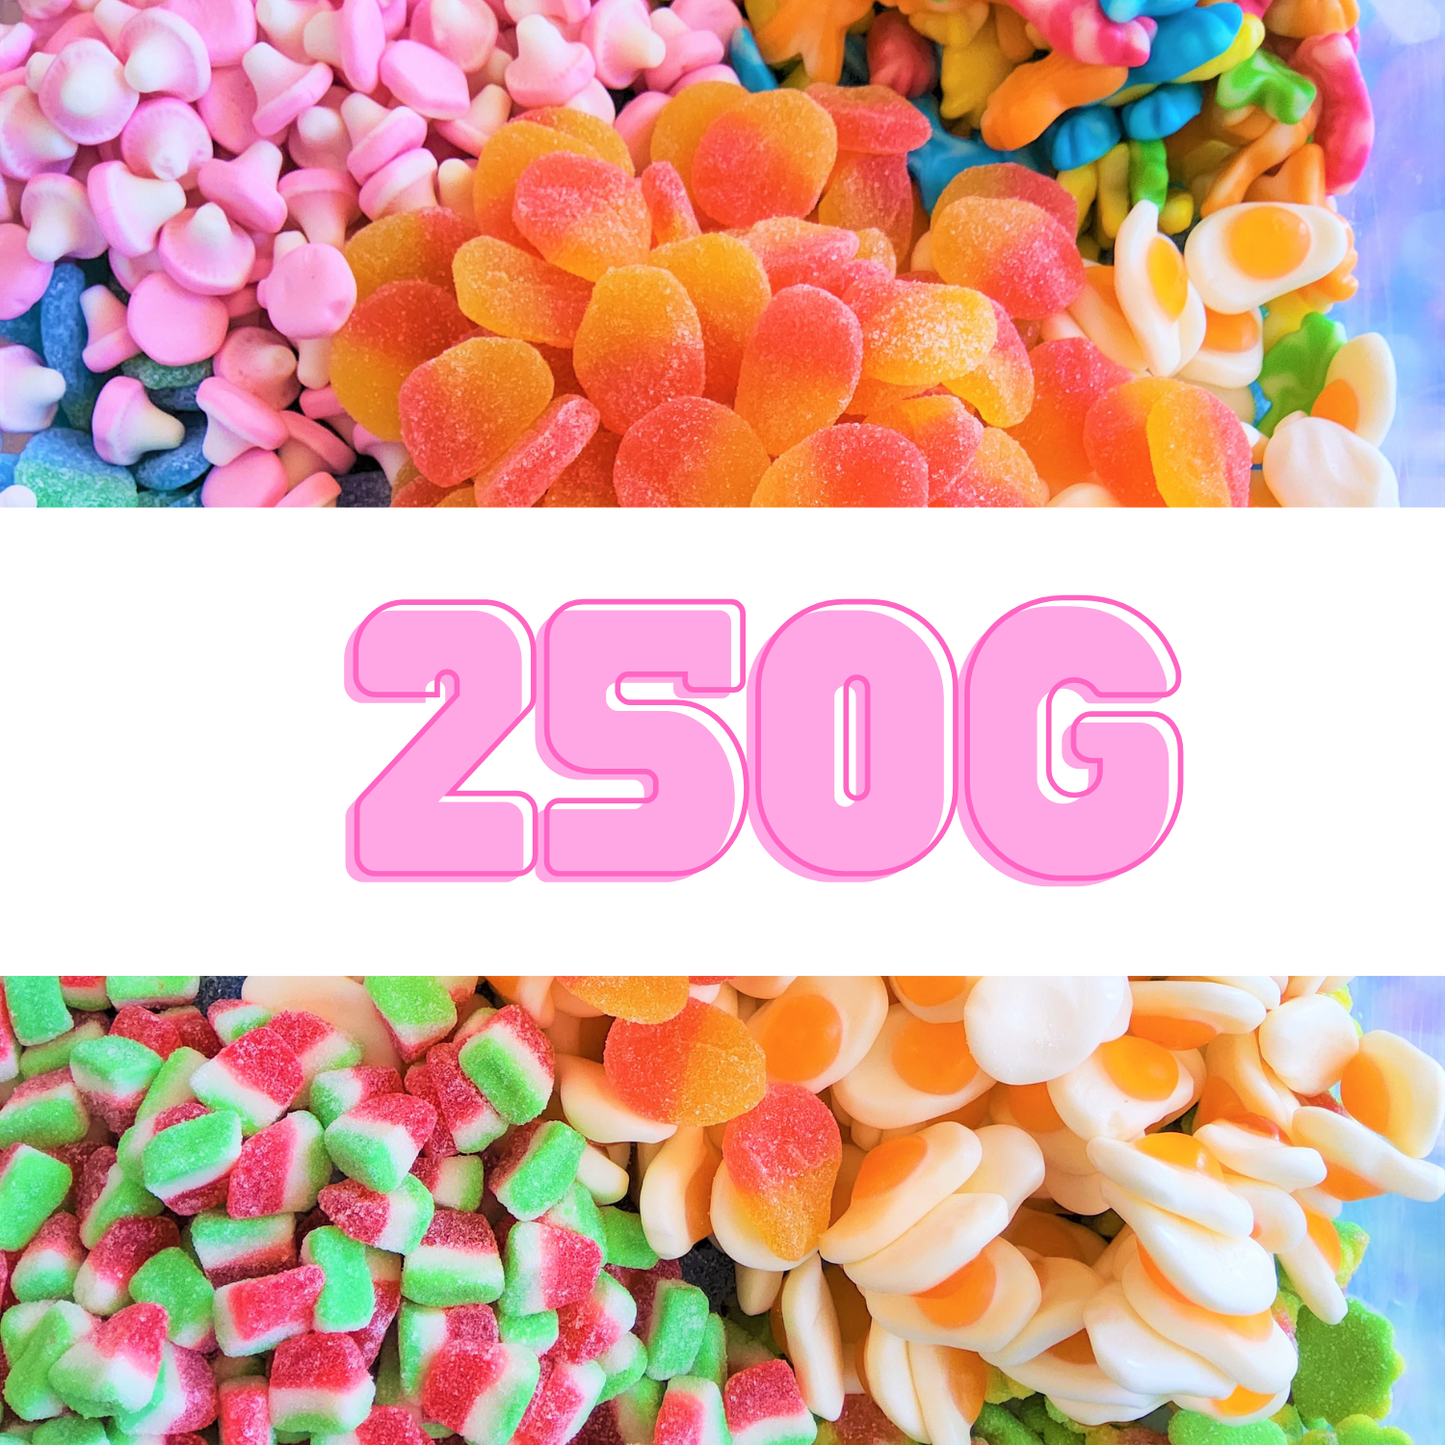 Create Your Own Pick`n MIx 250g ( Bag or Box available)